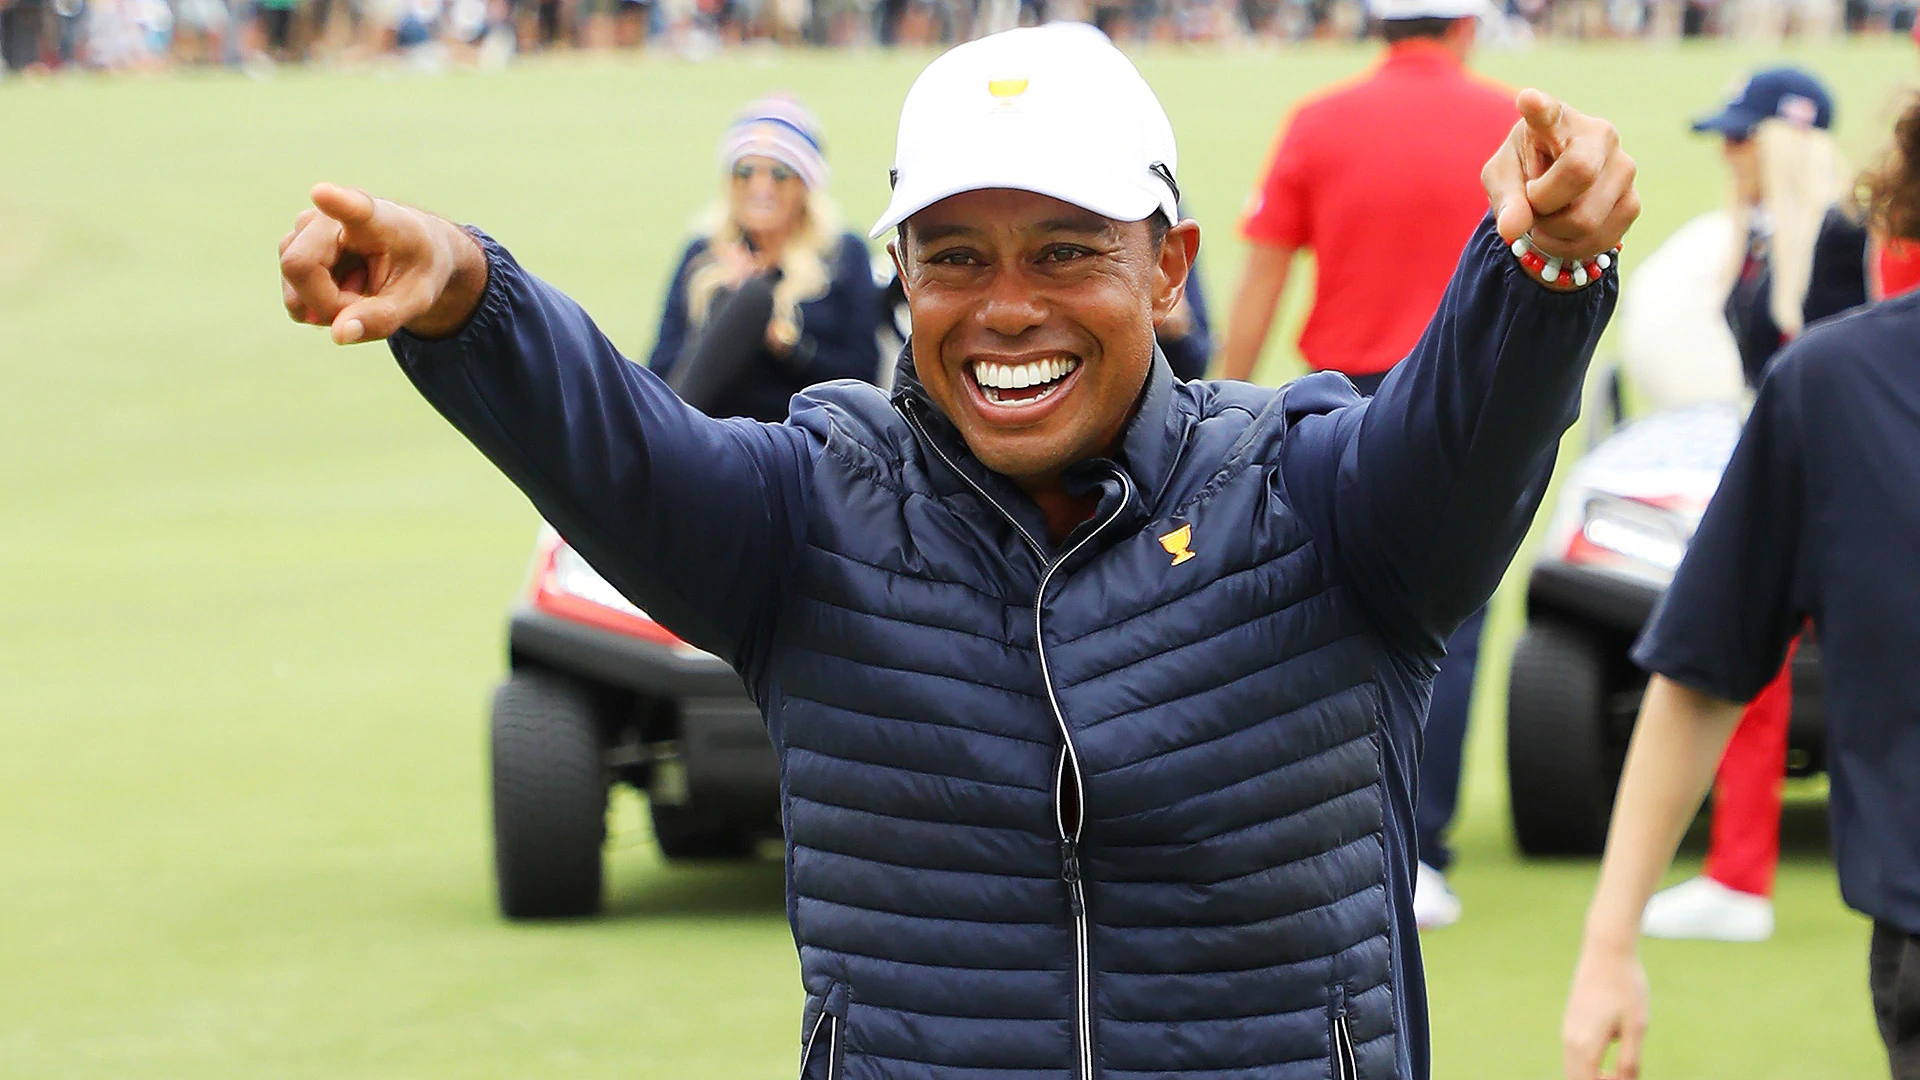 Tiger Woods remains mum about potential Ryder Cup captaincy in 2023